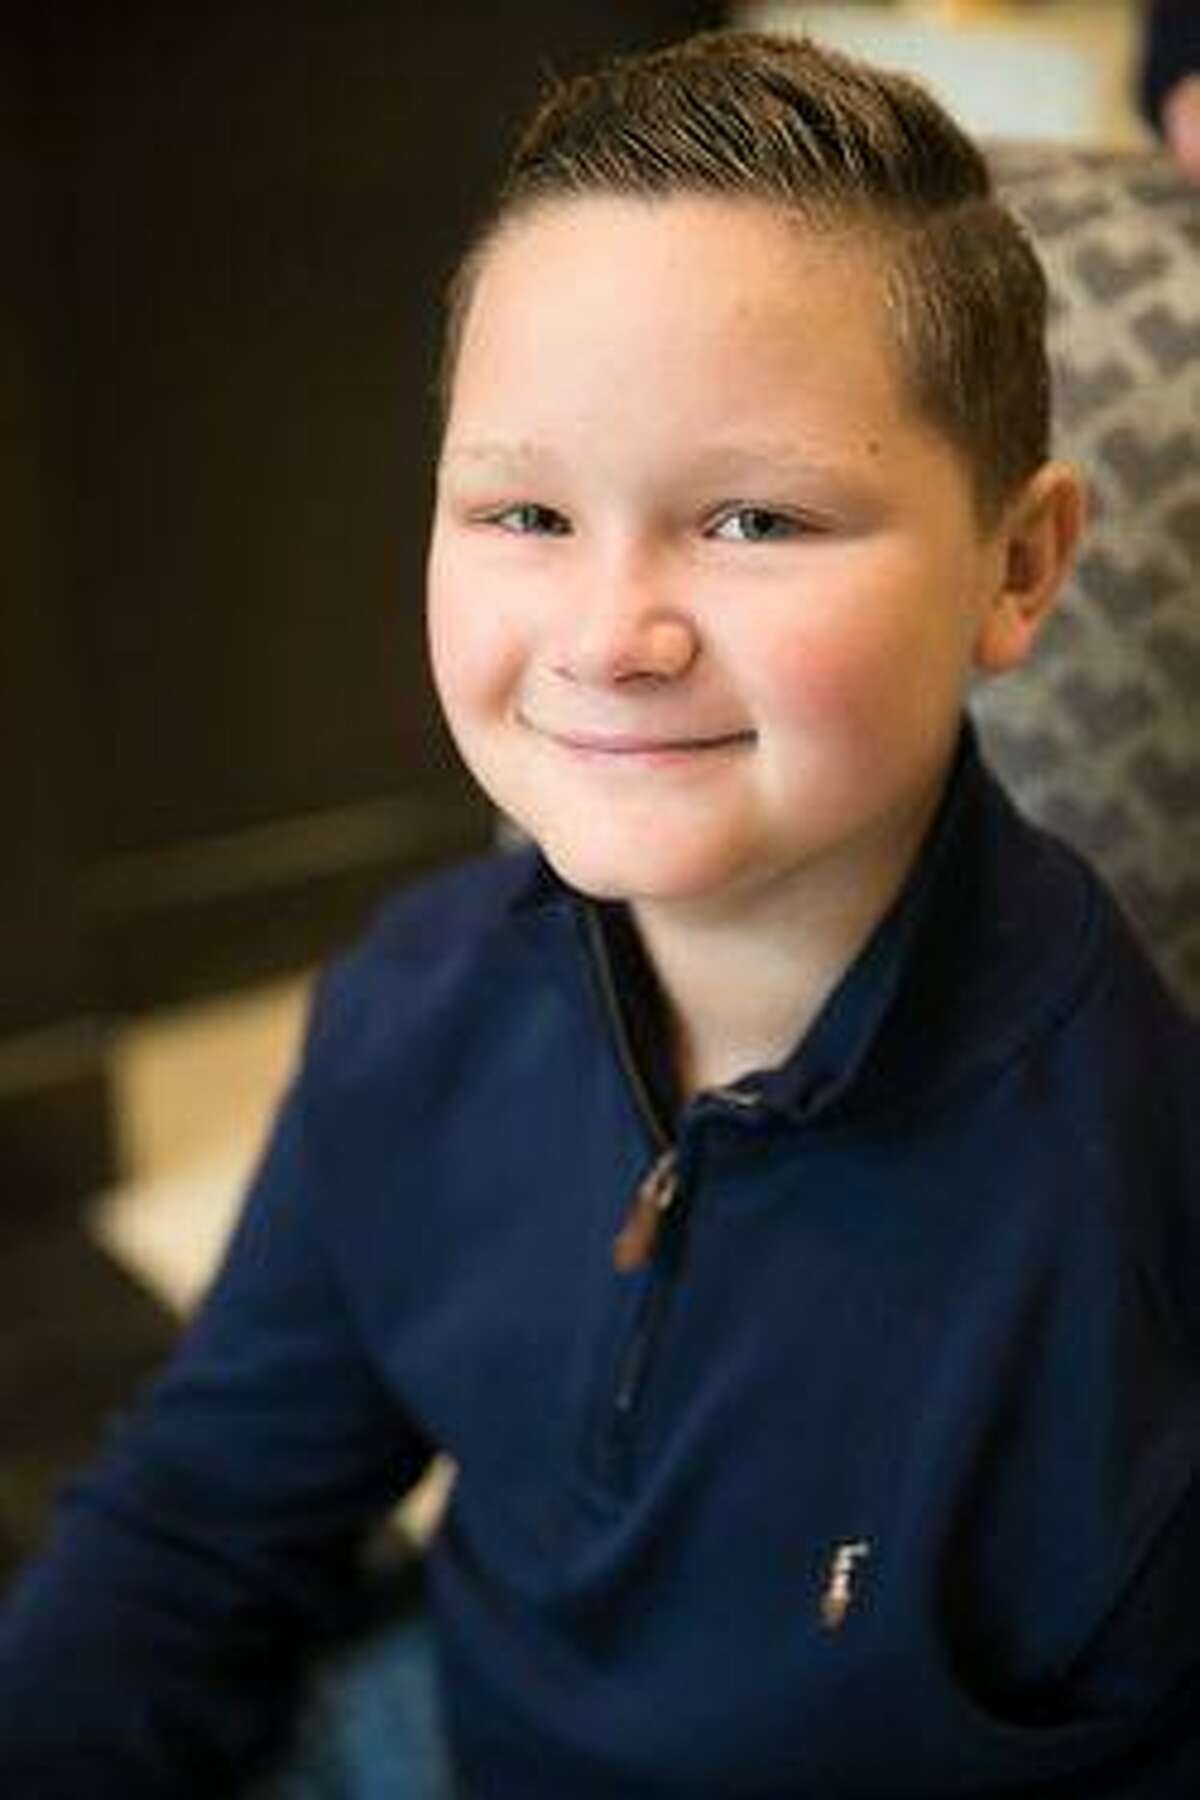 Damon E. Billeck, 13, passed away April 3, from his battle with bone cancer.